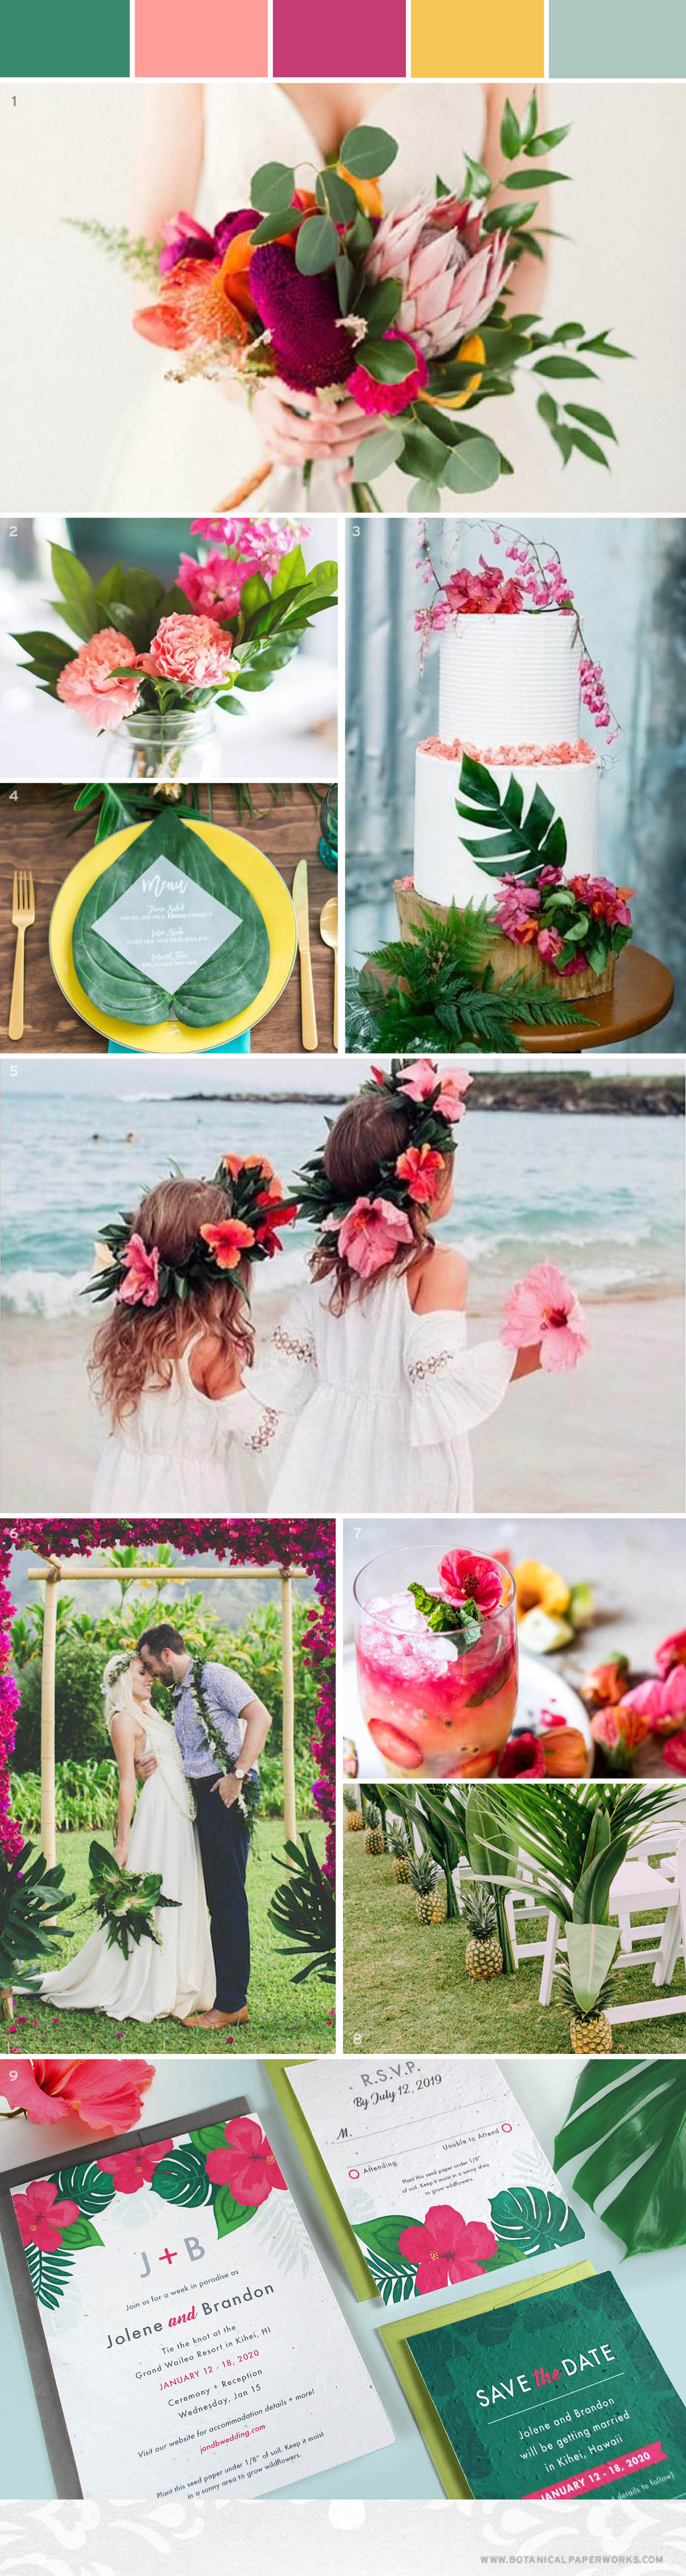 With vibrant pops of color, an ocean breeze, and exotic floral details, this tropical destination wedding inspiration will have you dreaming about a getaway wedding in paradise.